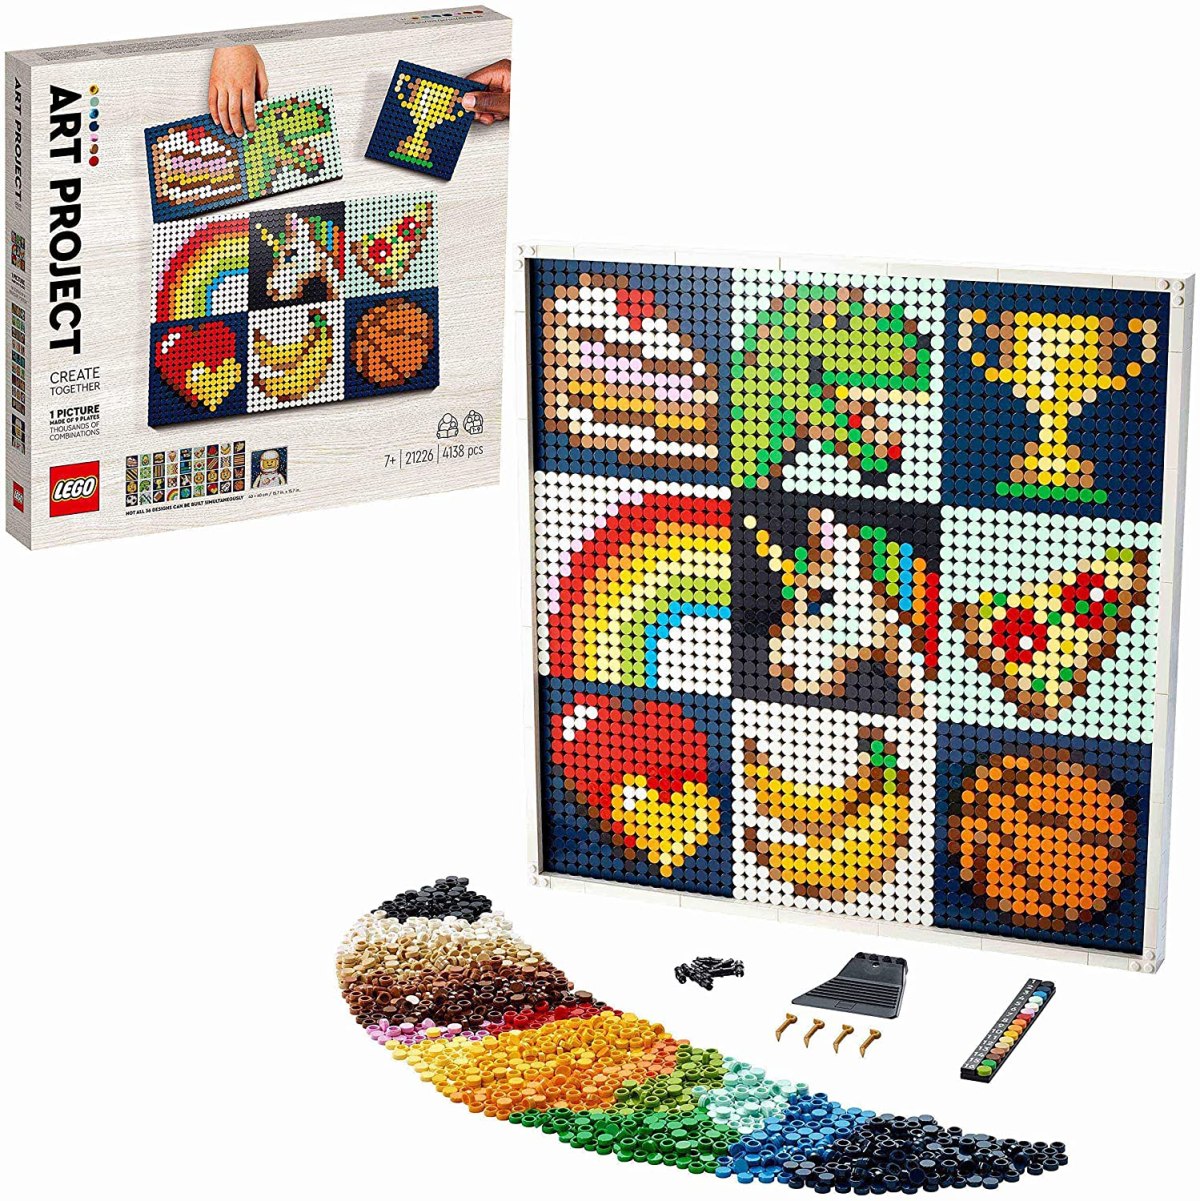 Amazon UK Lists New LEGO Art Project: Build Together (21226) For Building Tile-Art with Friends